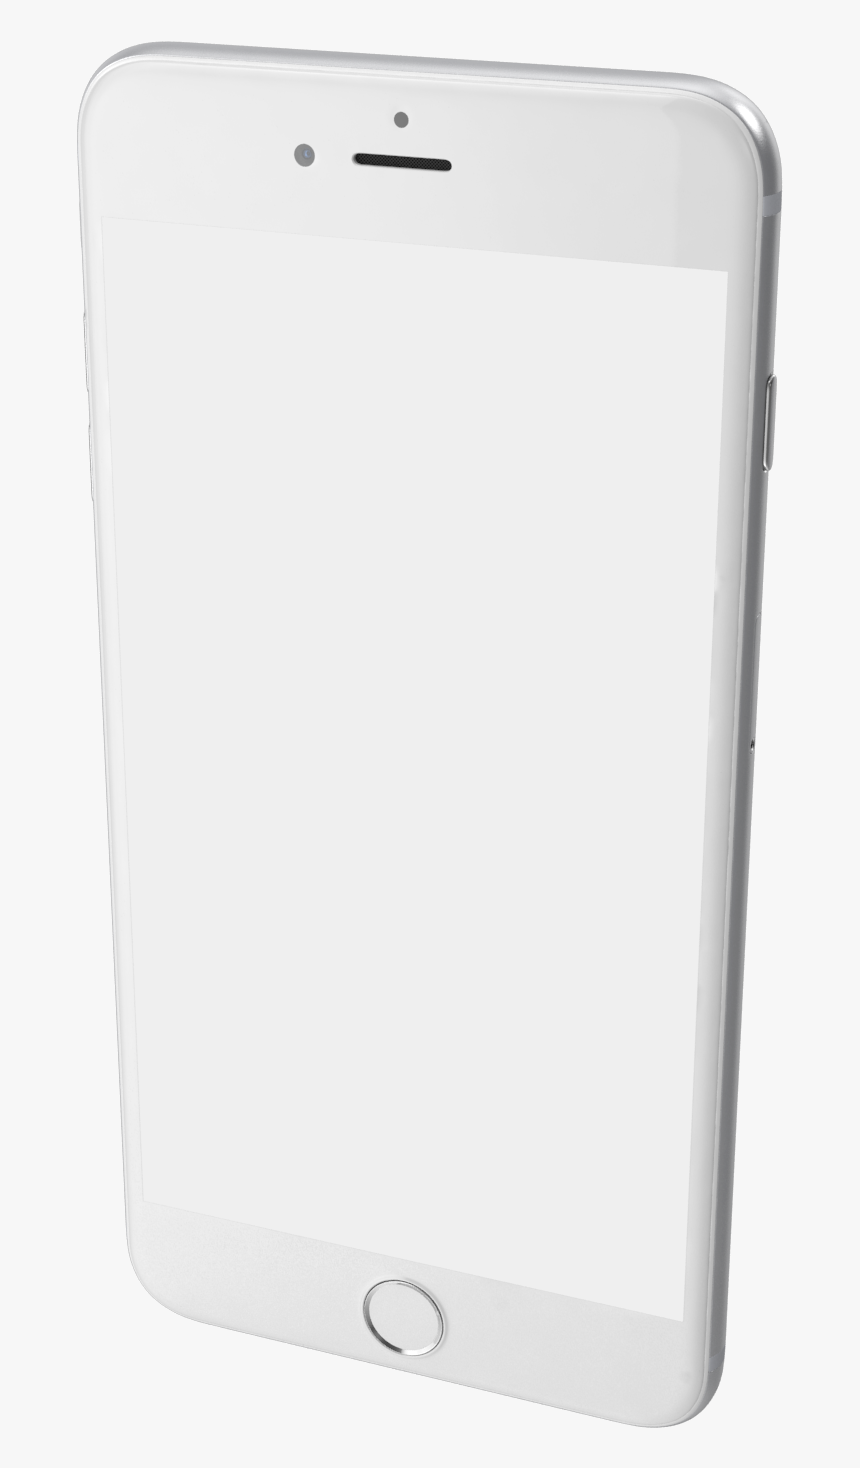 Iphone 6 Plus Silver Png Image - Ivory, Transparent Png, Free Download